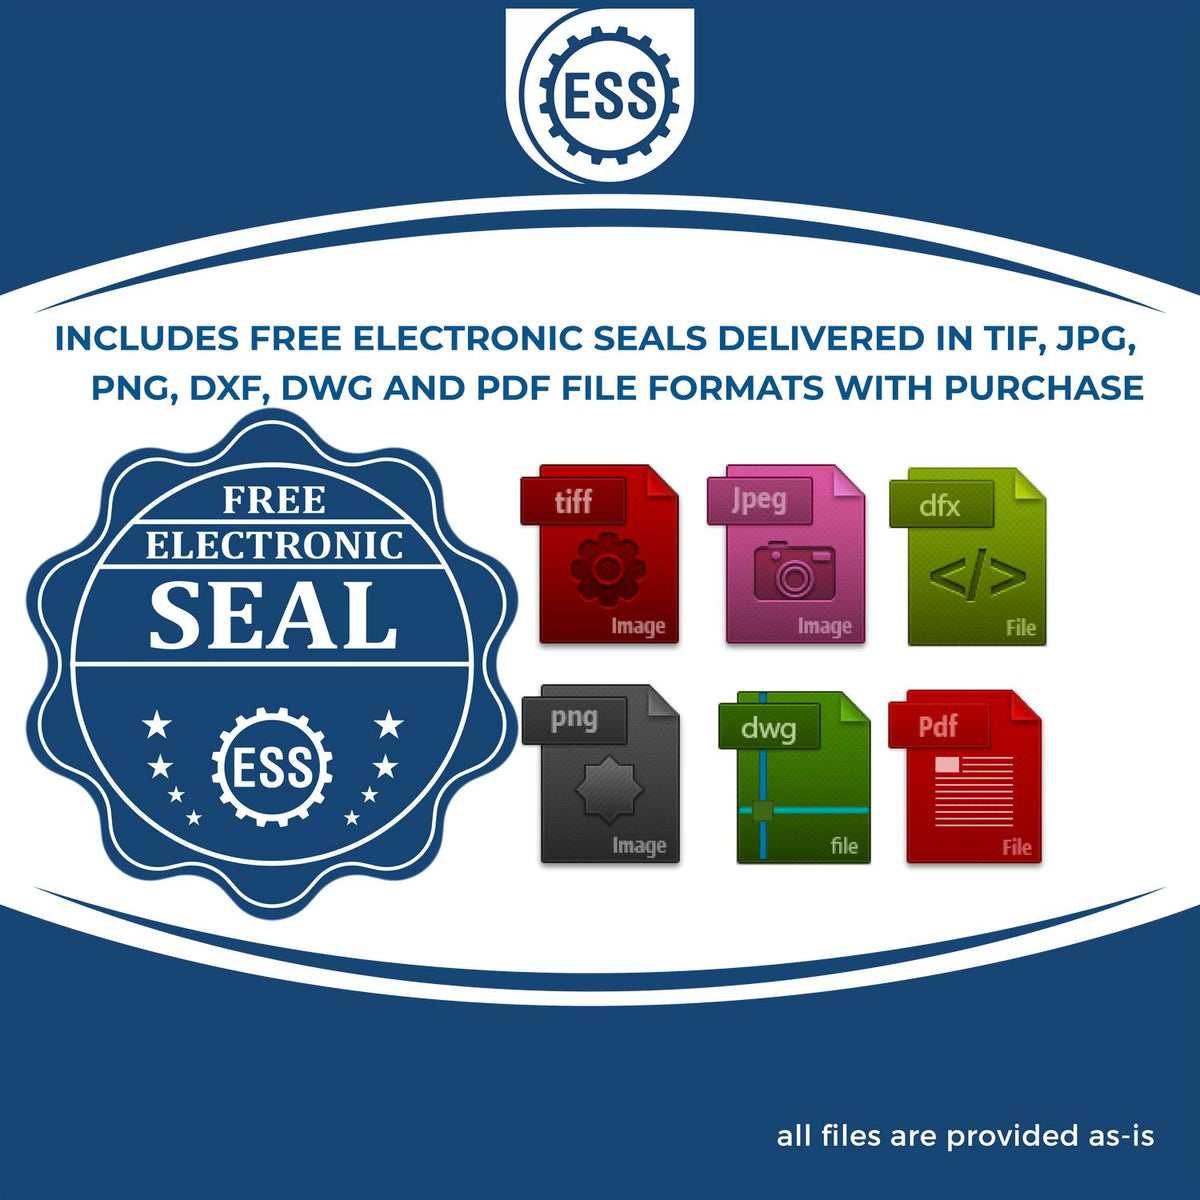 An infographic for the free electronic seal for the State of New Mexico Extended Long Reach Geologist Seal illustrating the different file type icons such as DXF, DWG, TIF, JPG and PNG.